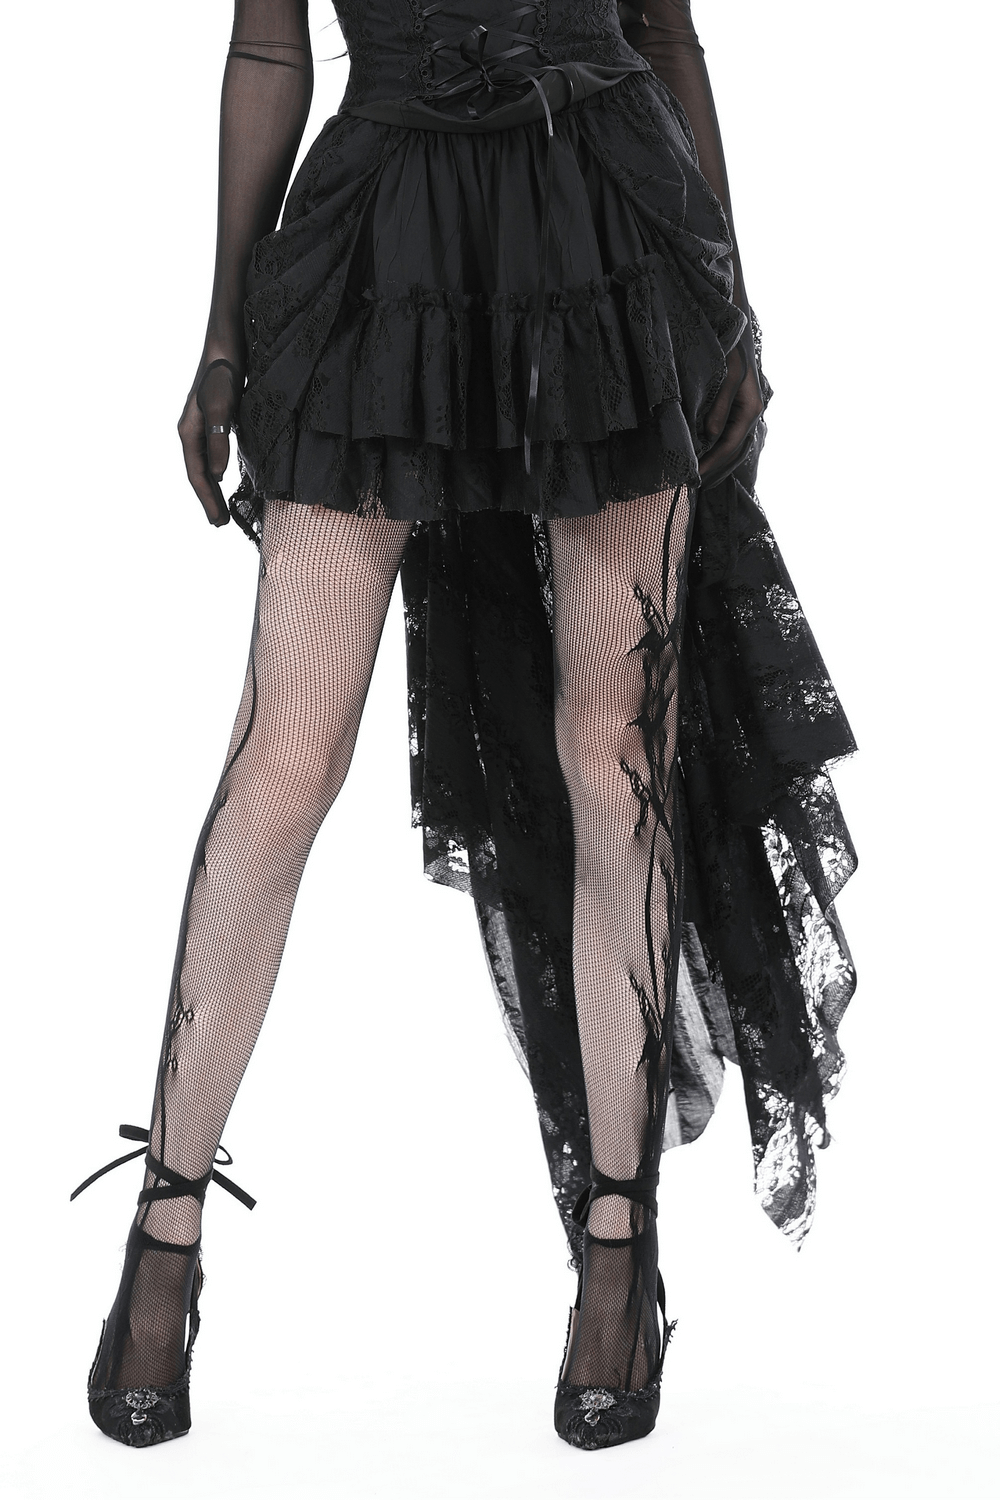 Gothic Lace High-Low Skirt with Romantic Ruffles for Women